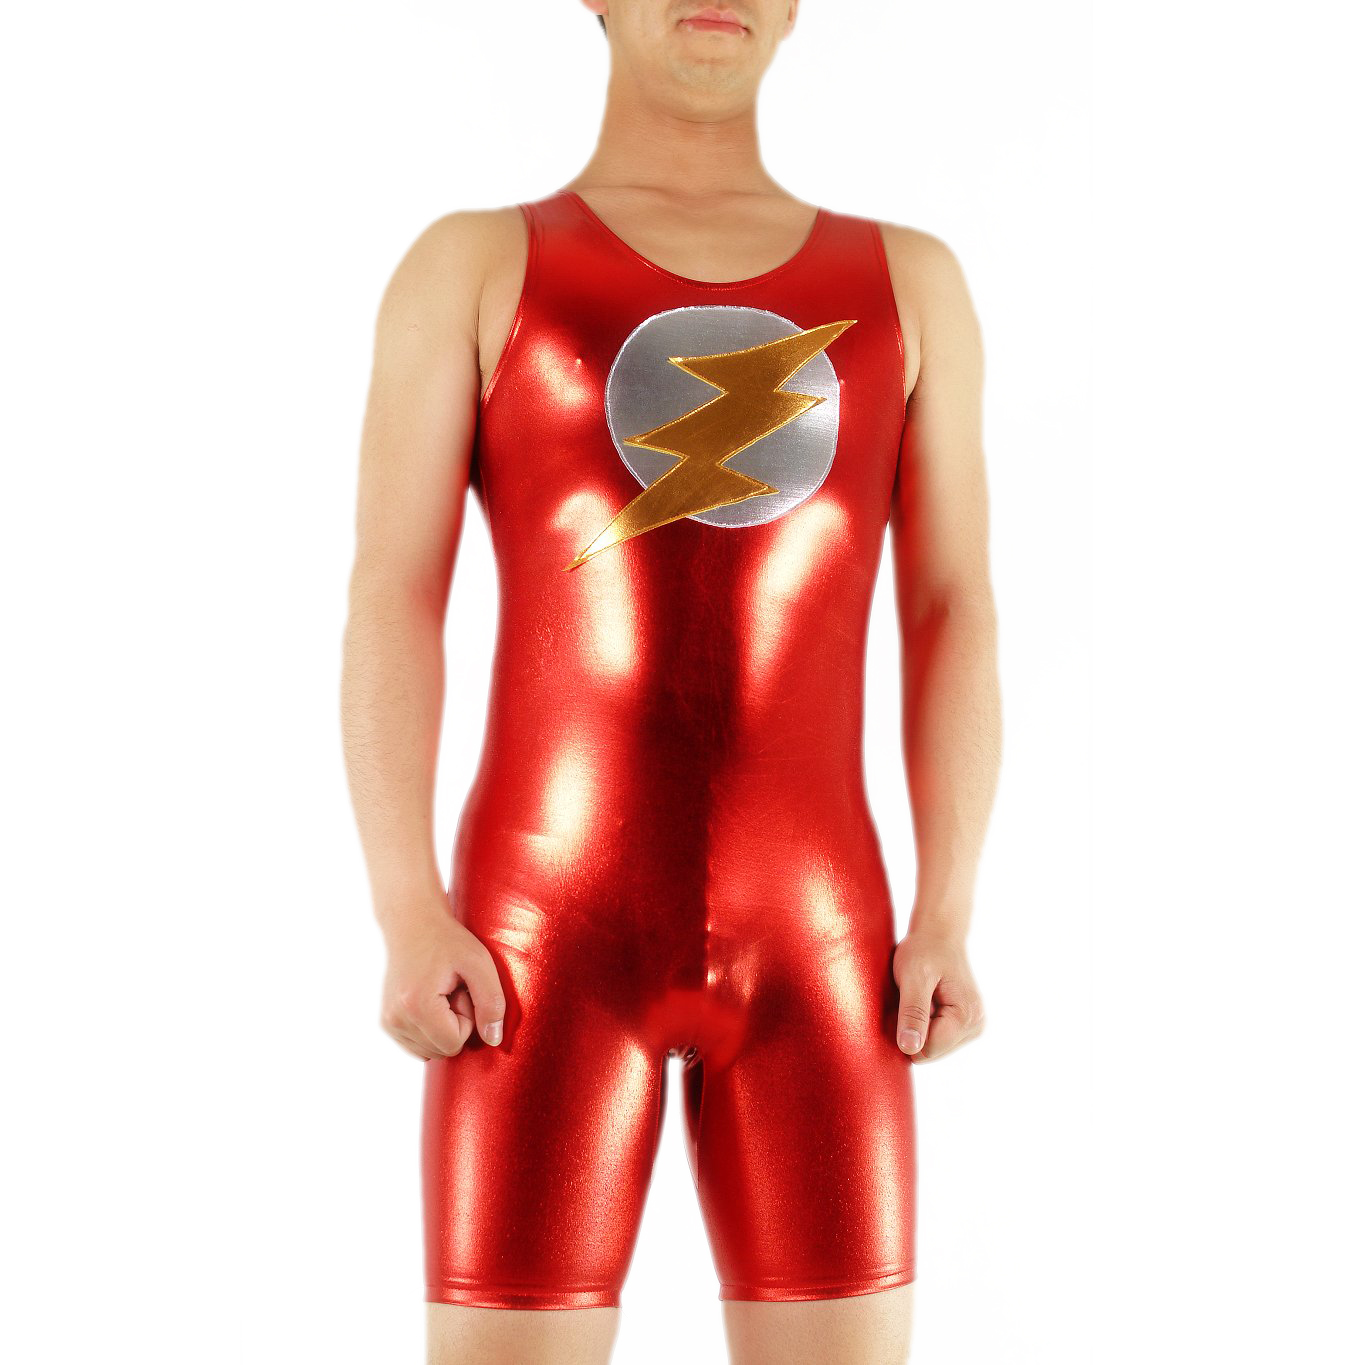 Men's Jumpsuit-styled Red Shiny Metallic Sleeveless Catsuit (M11 - Click Image to Close